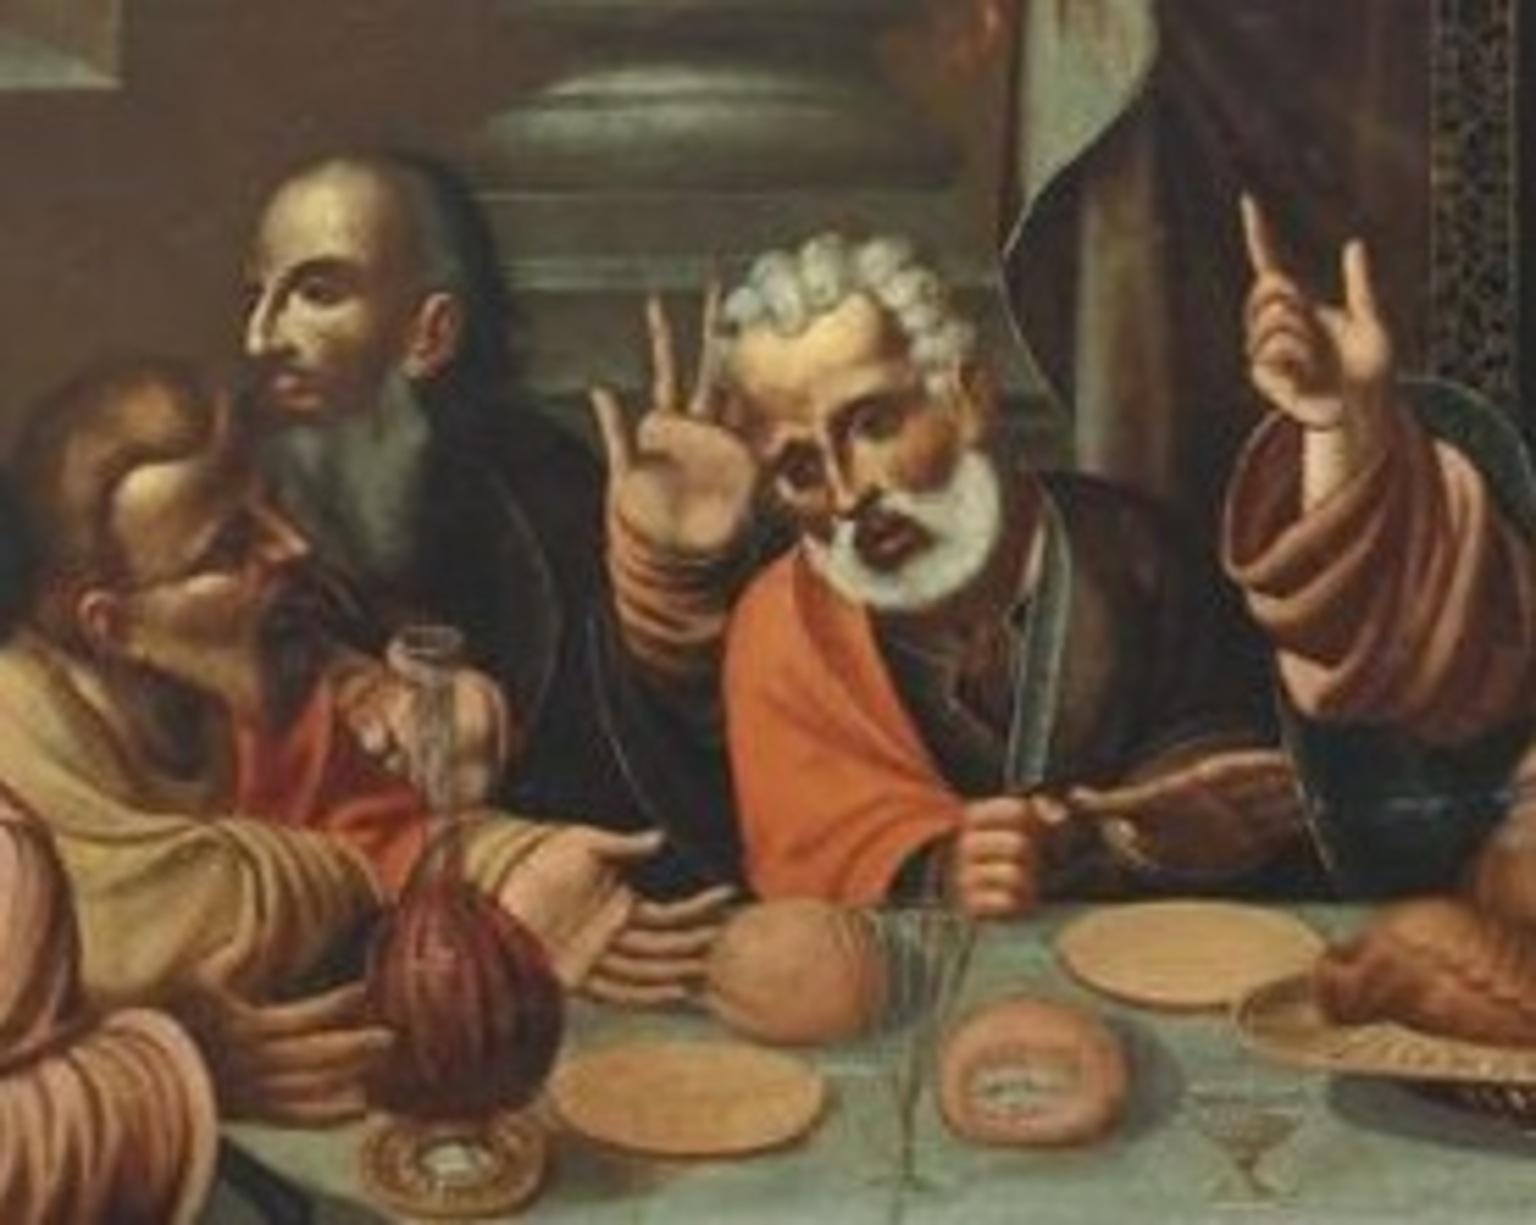 17th century beautiful representation of the last supper, oil on canvas, Venetian school, late 1600s.
This object is subject to the superintendence of the fine arts, therefore it must be accompanied by free circulation, release times range from 10